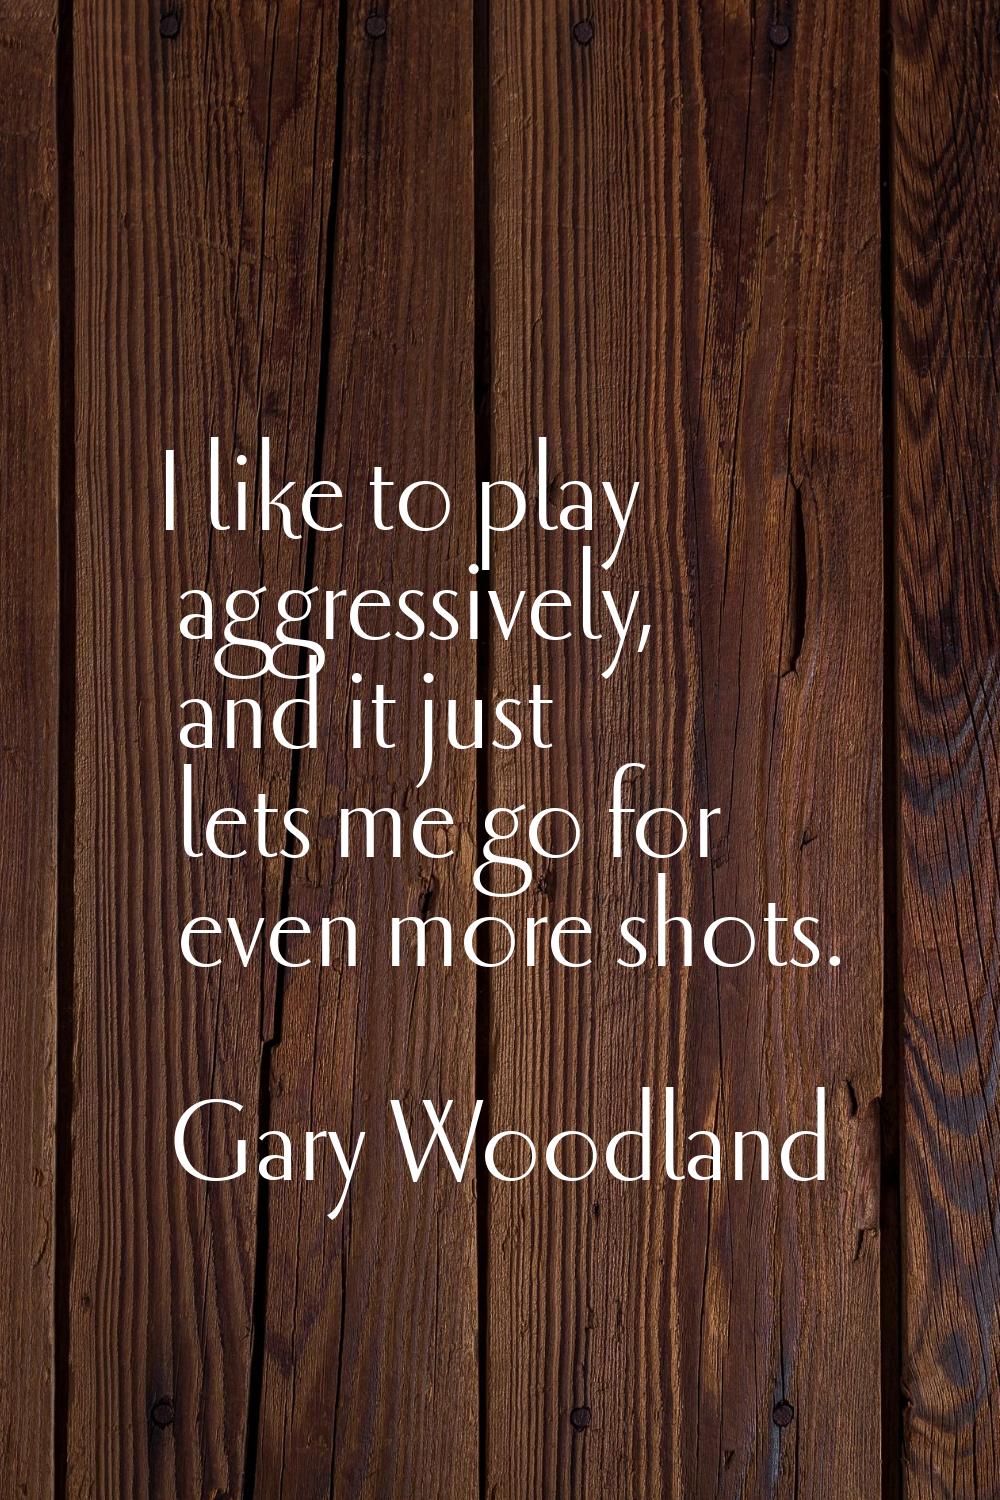 I like to play aggressively, and it just lets me go for even more shots.